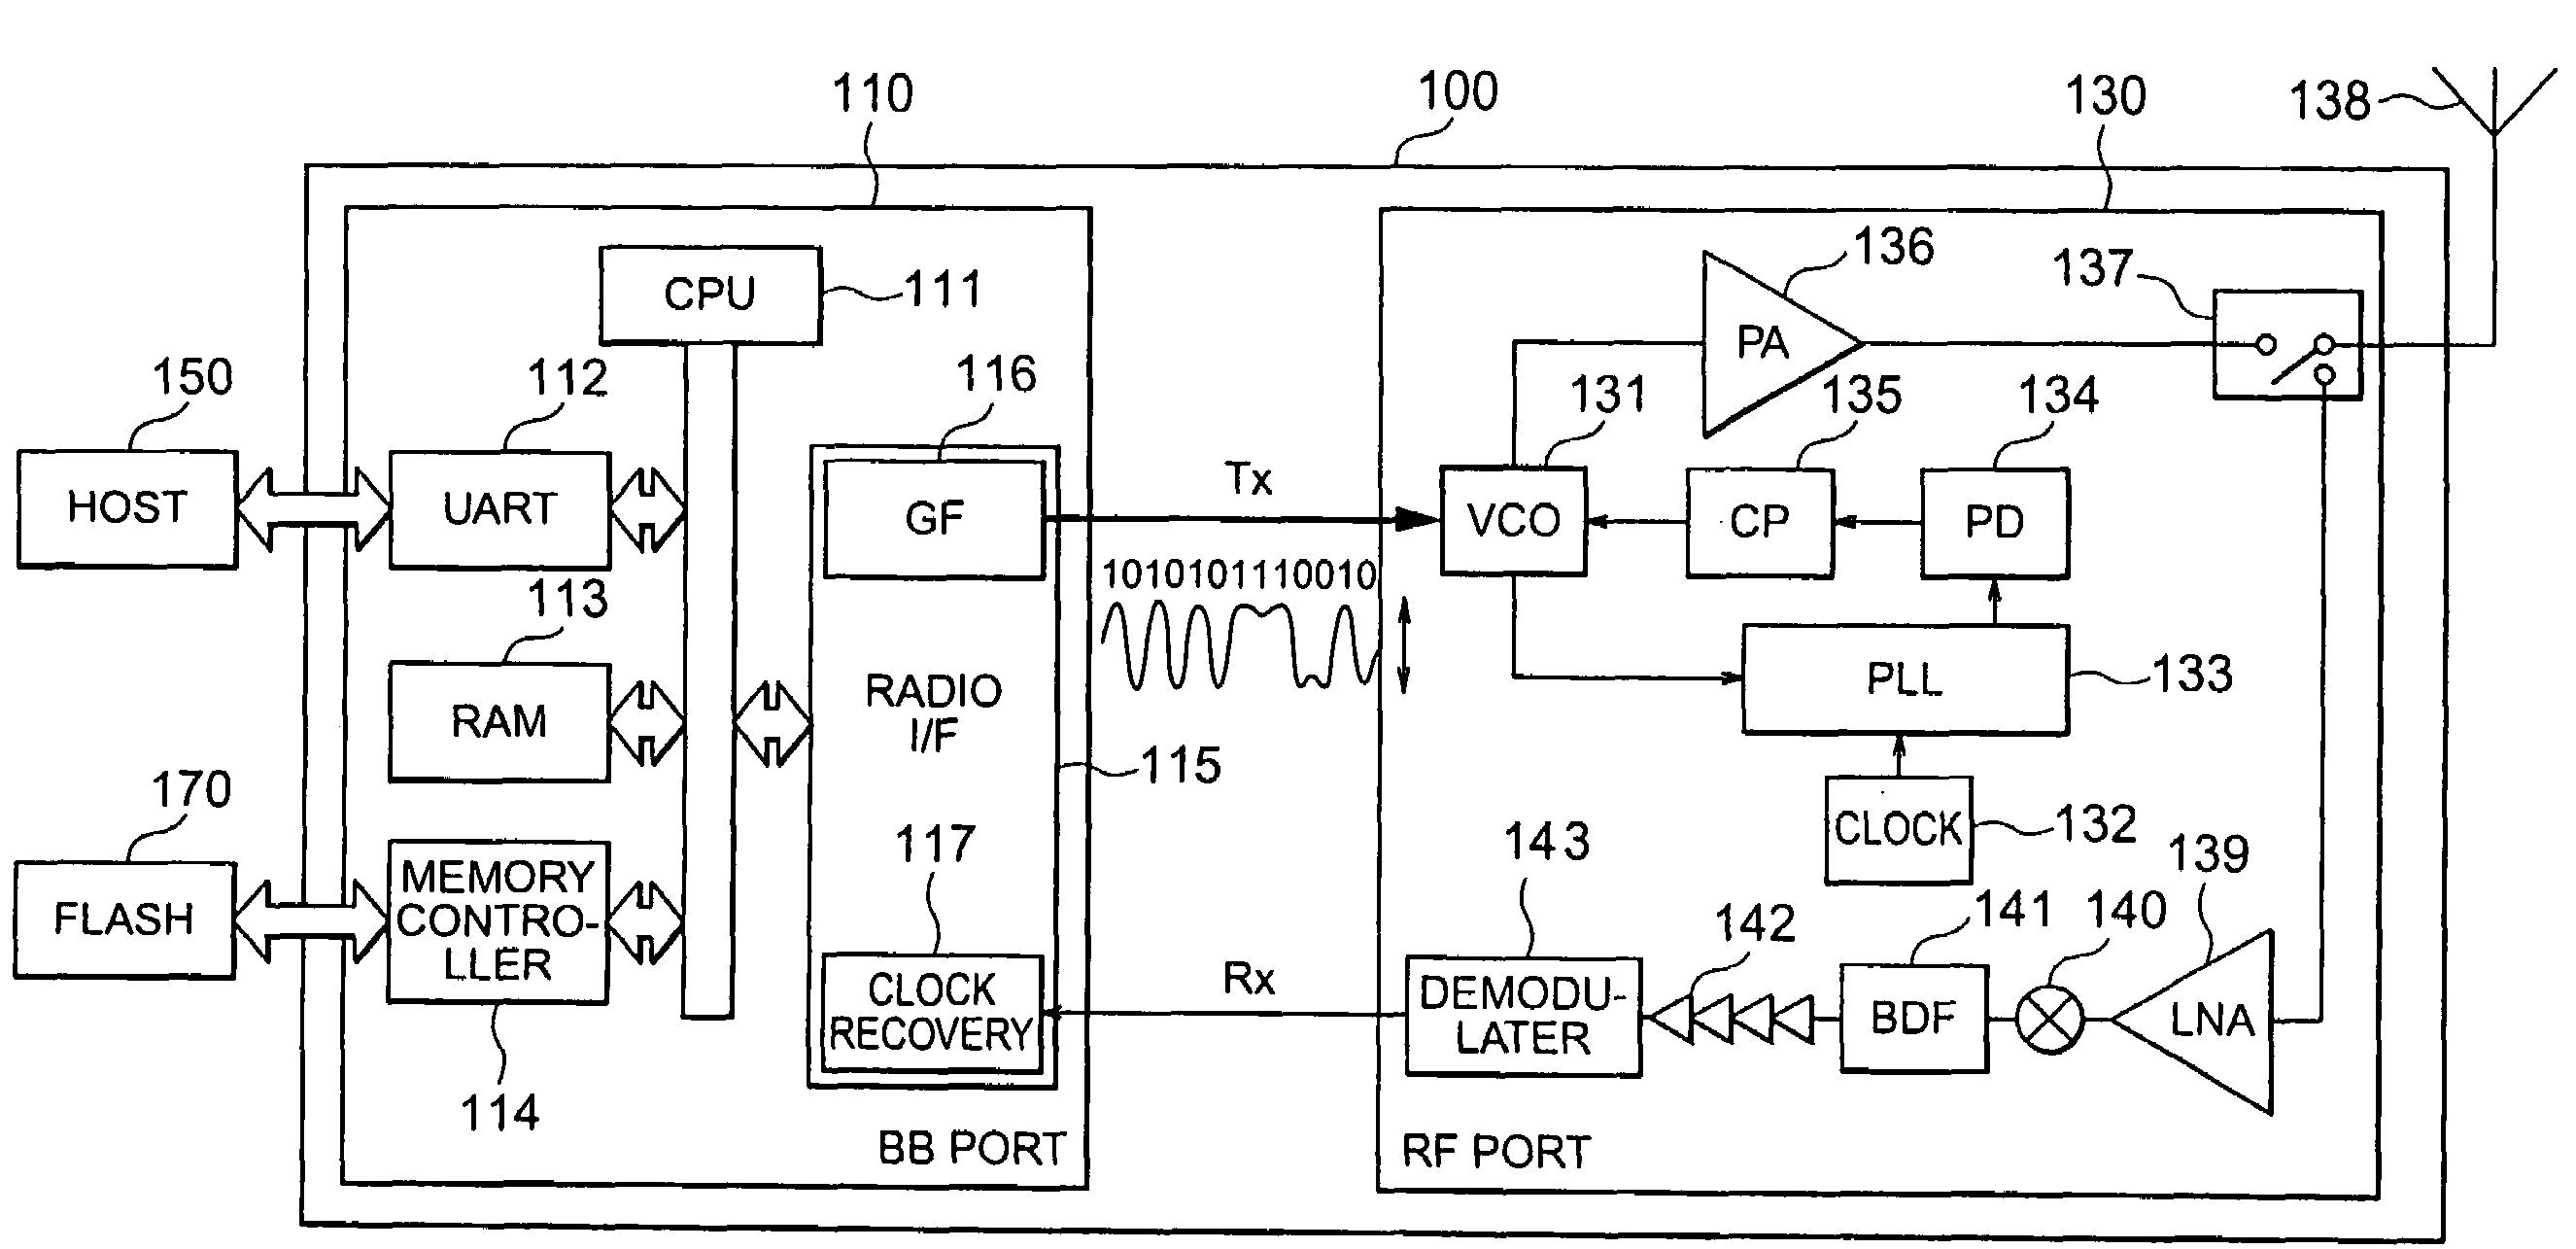 Frequency hopping communication device with simple structure